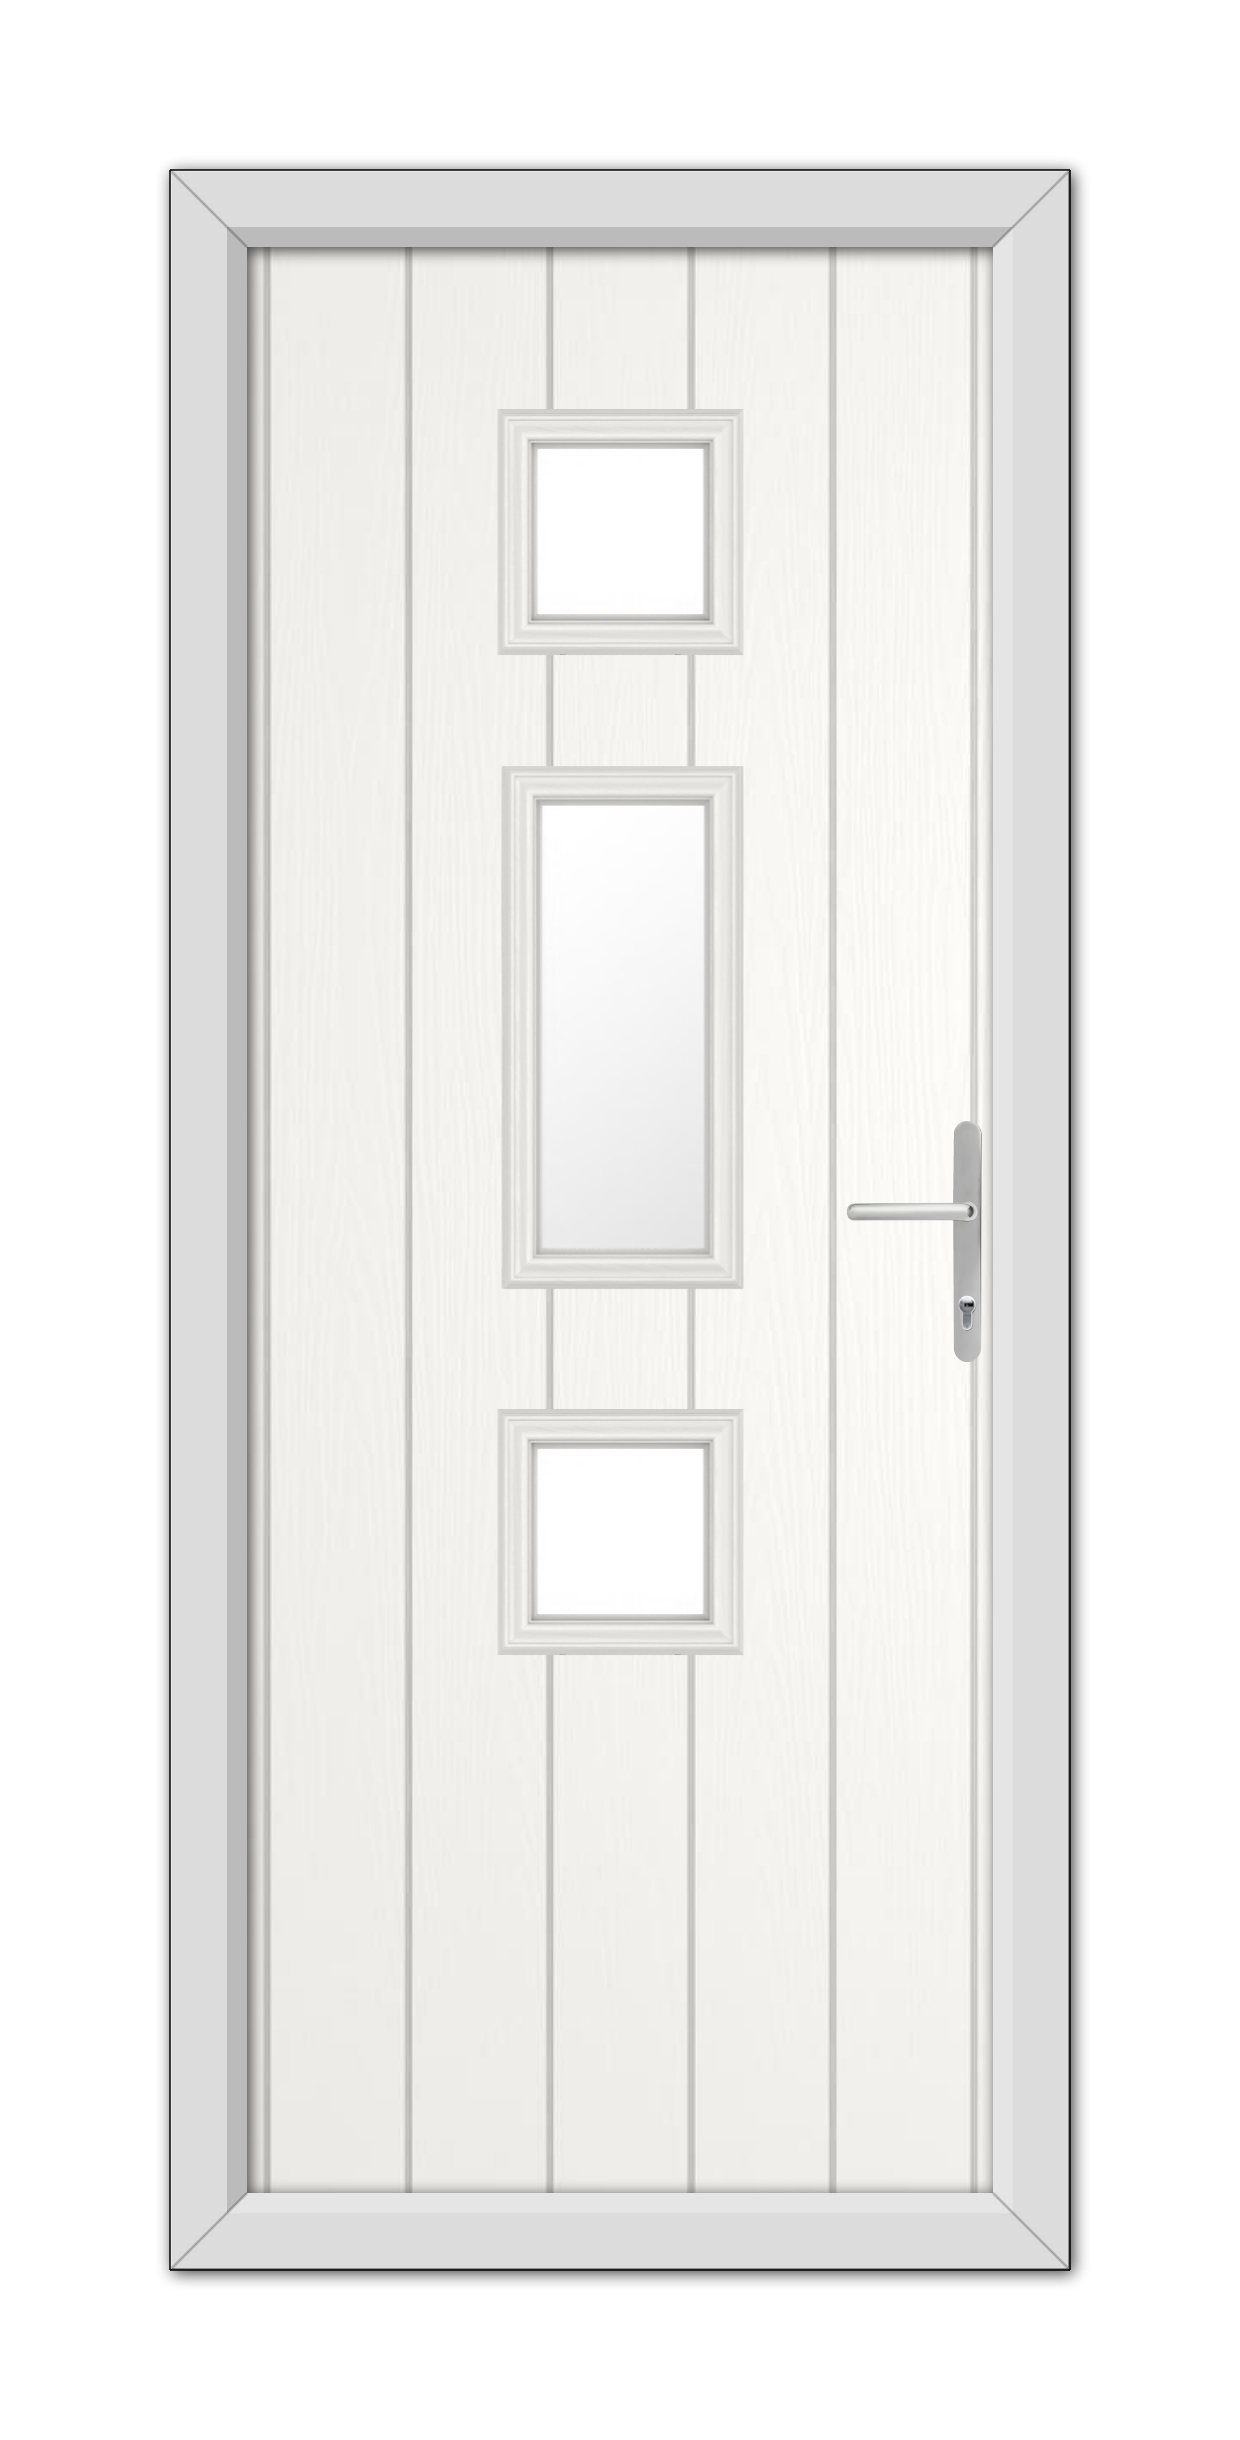 A White York Composite Door 48mm Timber Core featuring three rectangular frosted glass panels arranged vertically and a stainless steel handle, set within a simple frame.